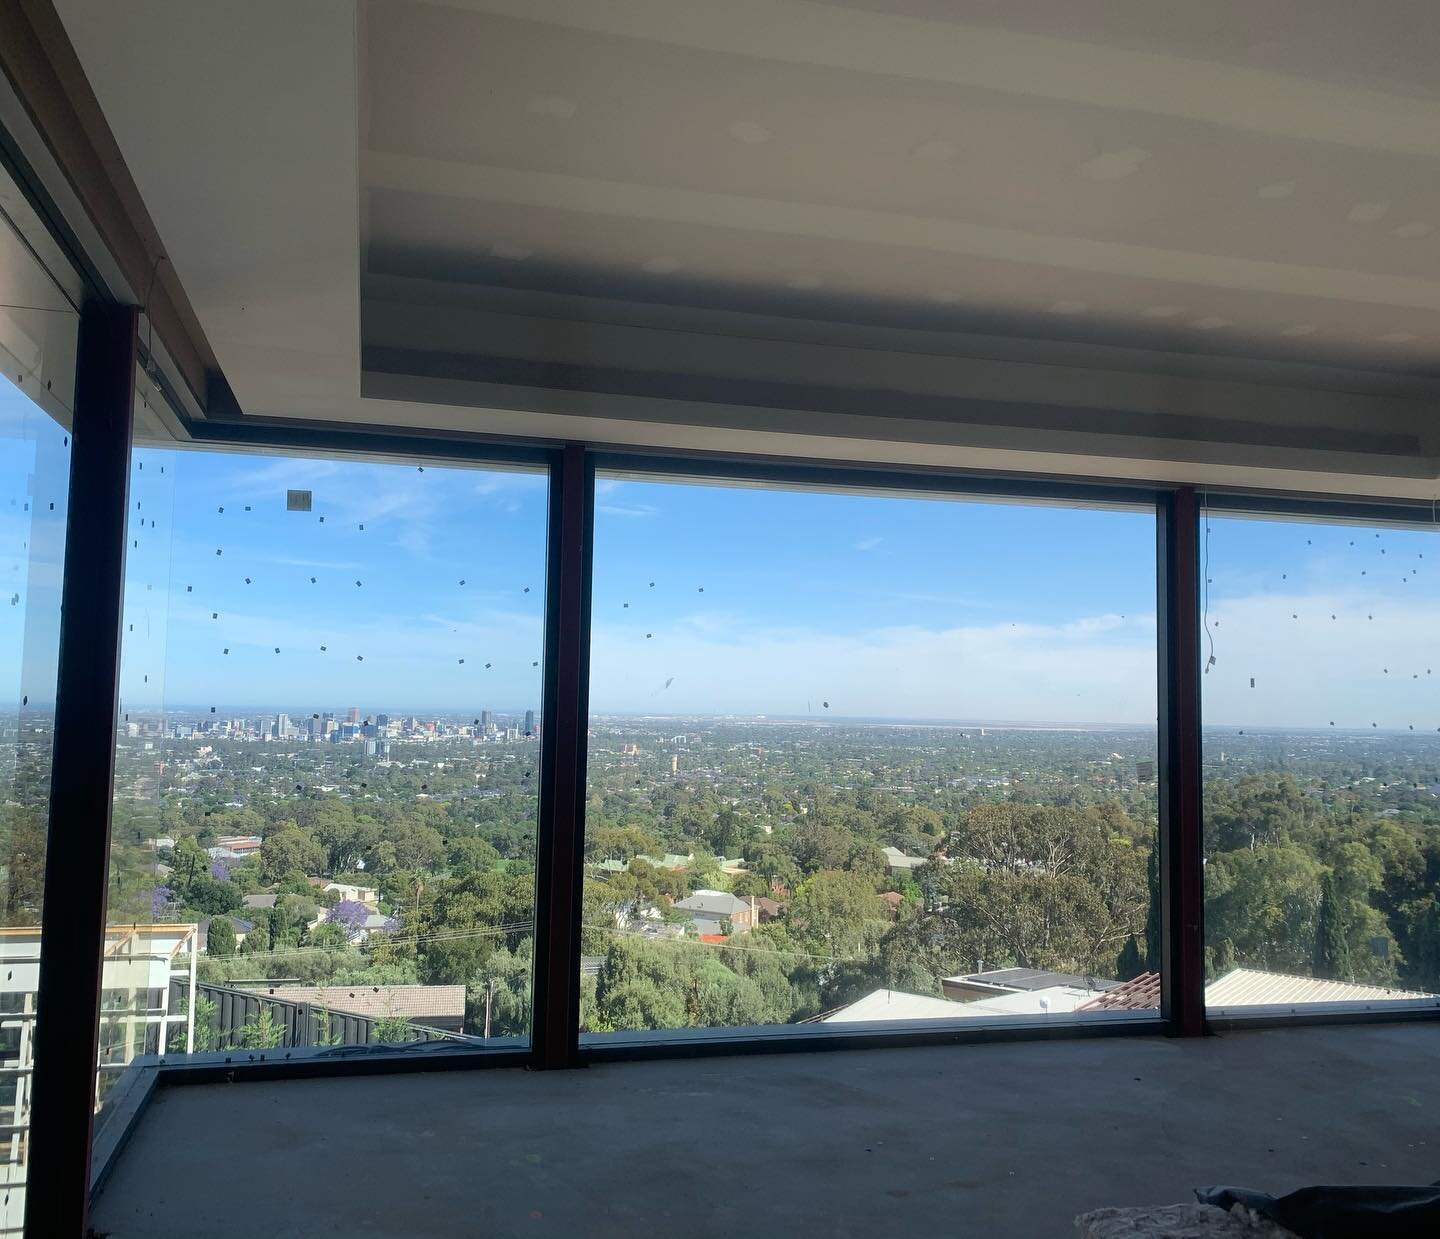 Check out the view from our latest project in Glen Osmond. Floor to ceiling windows to take in the view of Adelaides CBD. 🔹🔹#adelaidearchitecture #adelaidedesign #framelessglazingsystem